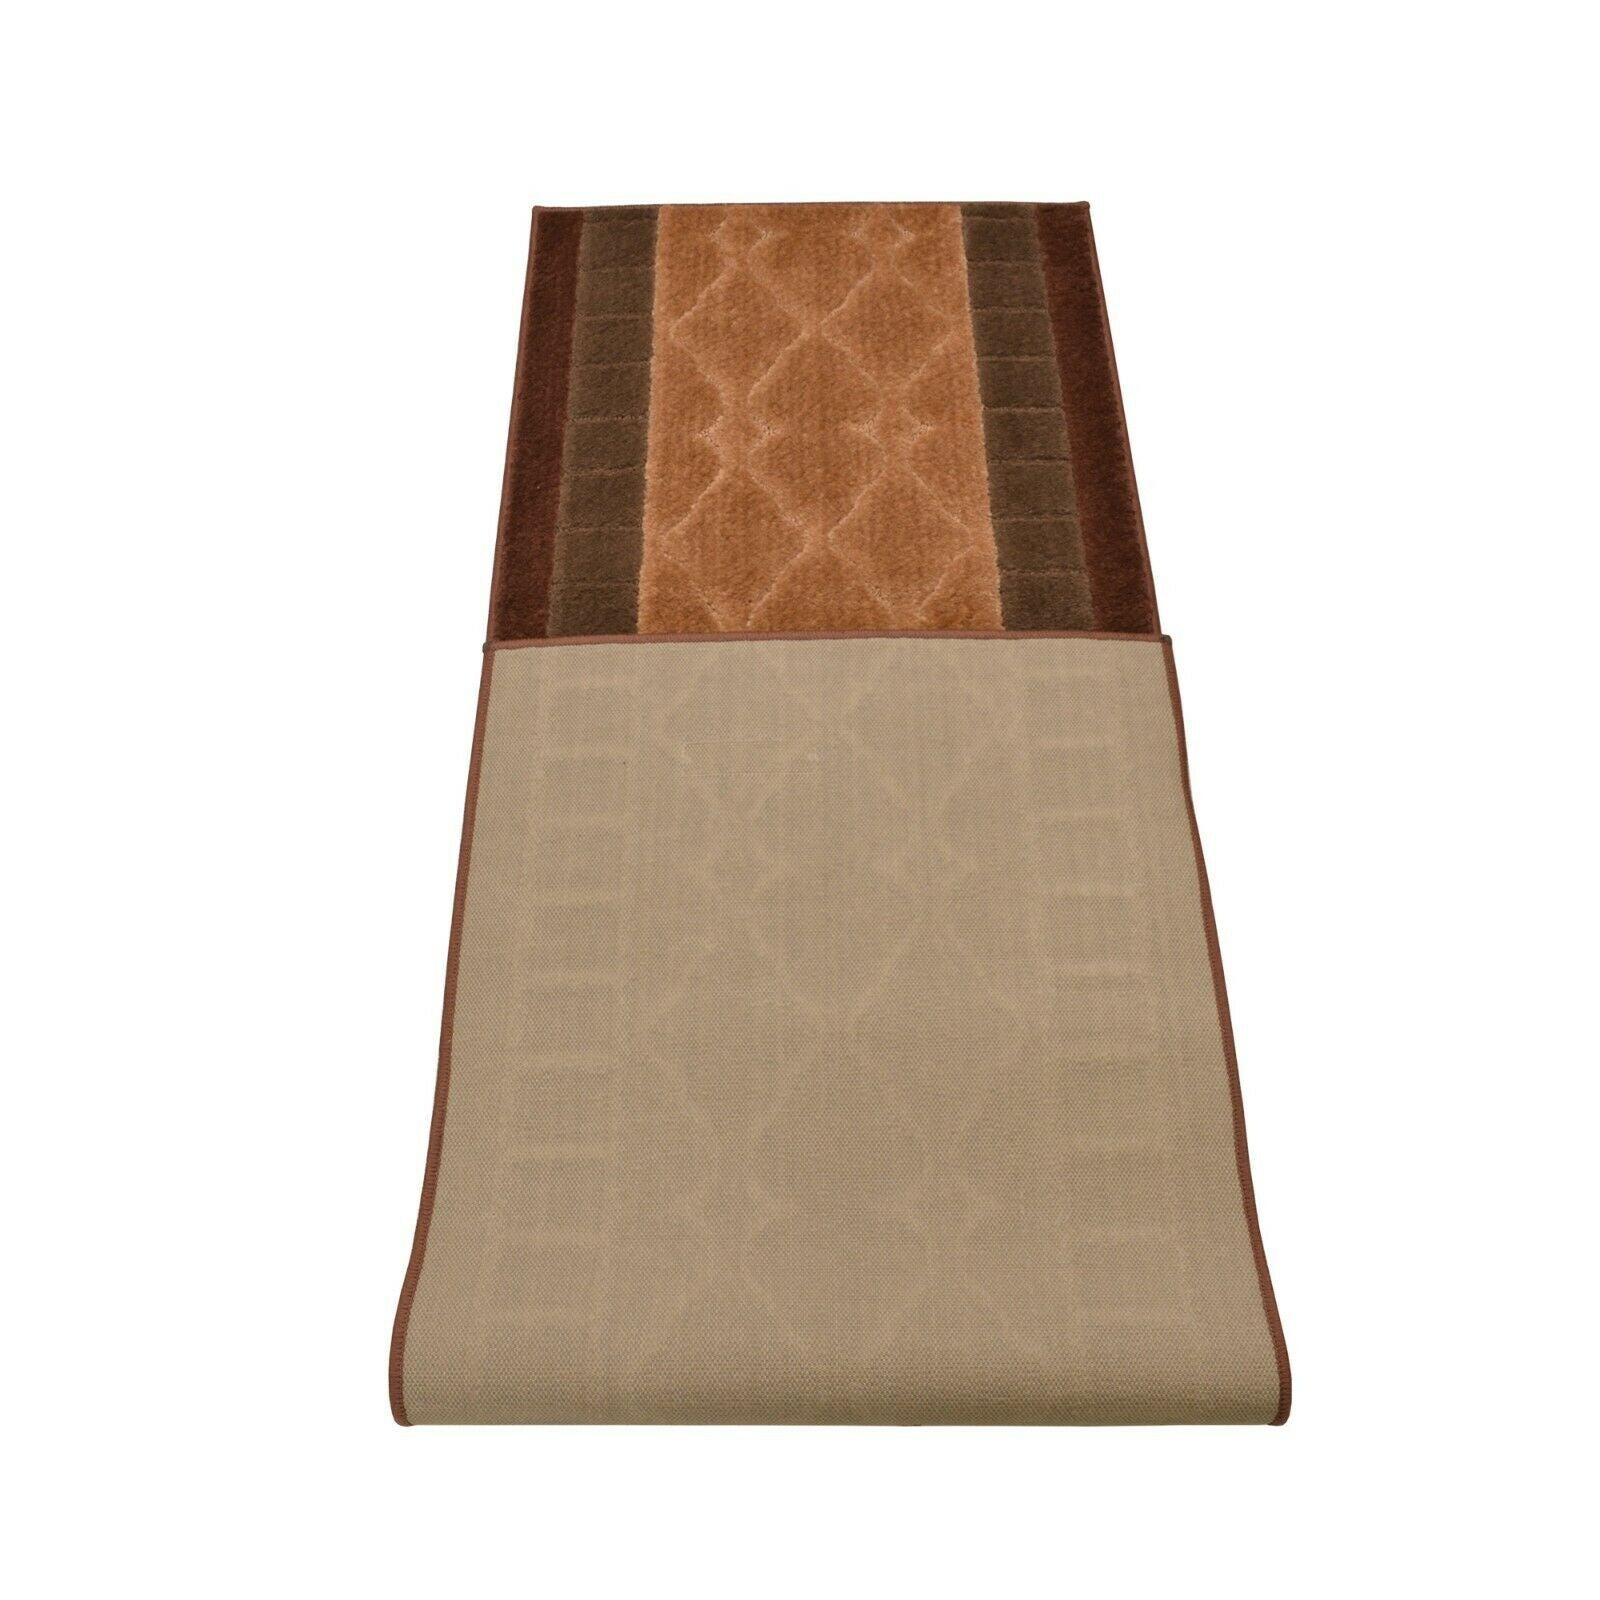 Custom Size Runner Rug Wide Trellis Beige-Brown Color Skid Resistant Rug Runner Customize Up to 50 Feet and 30 Inch Width Cut to Size Rugs